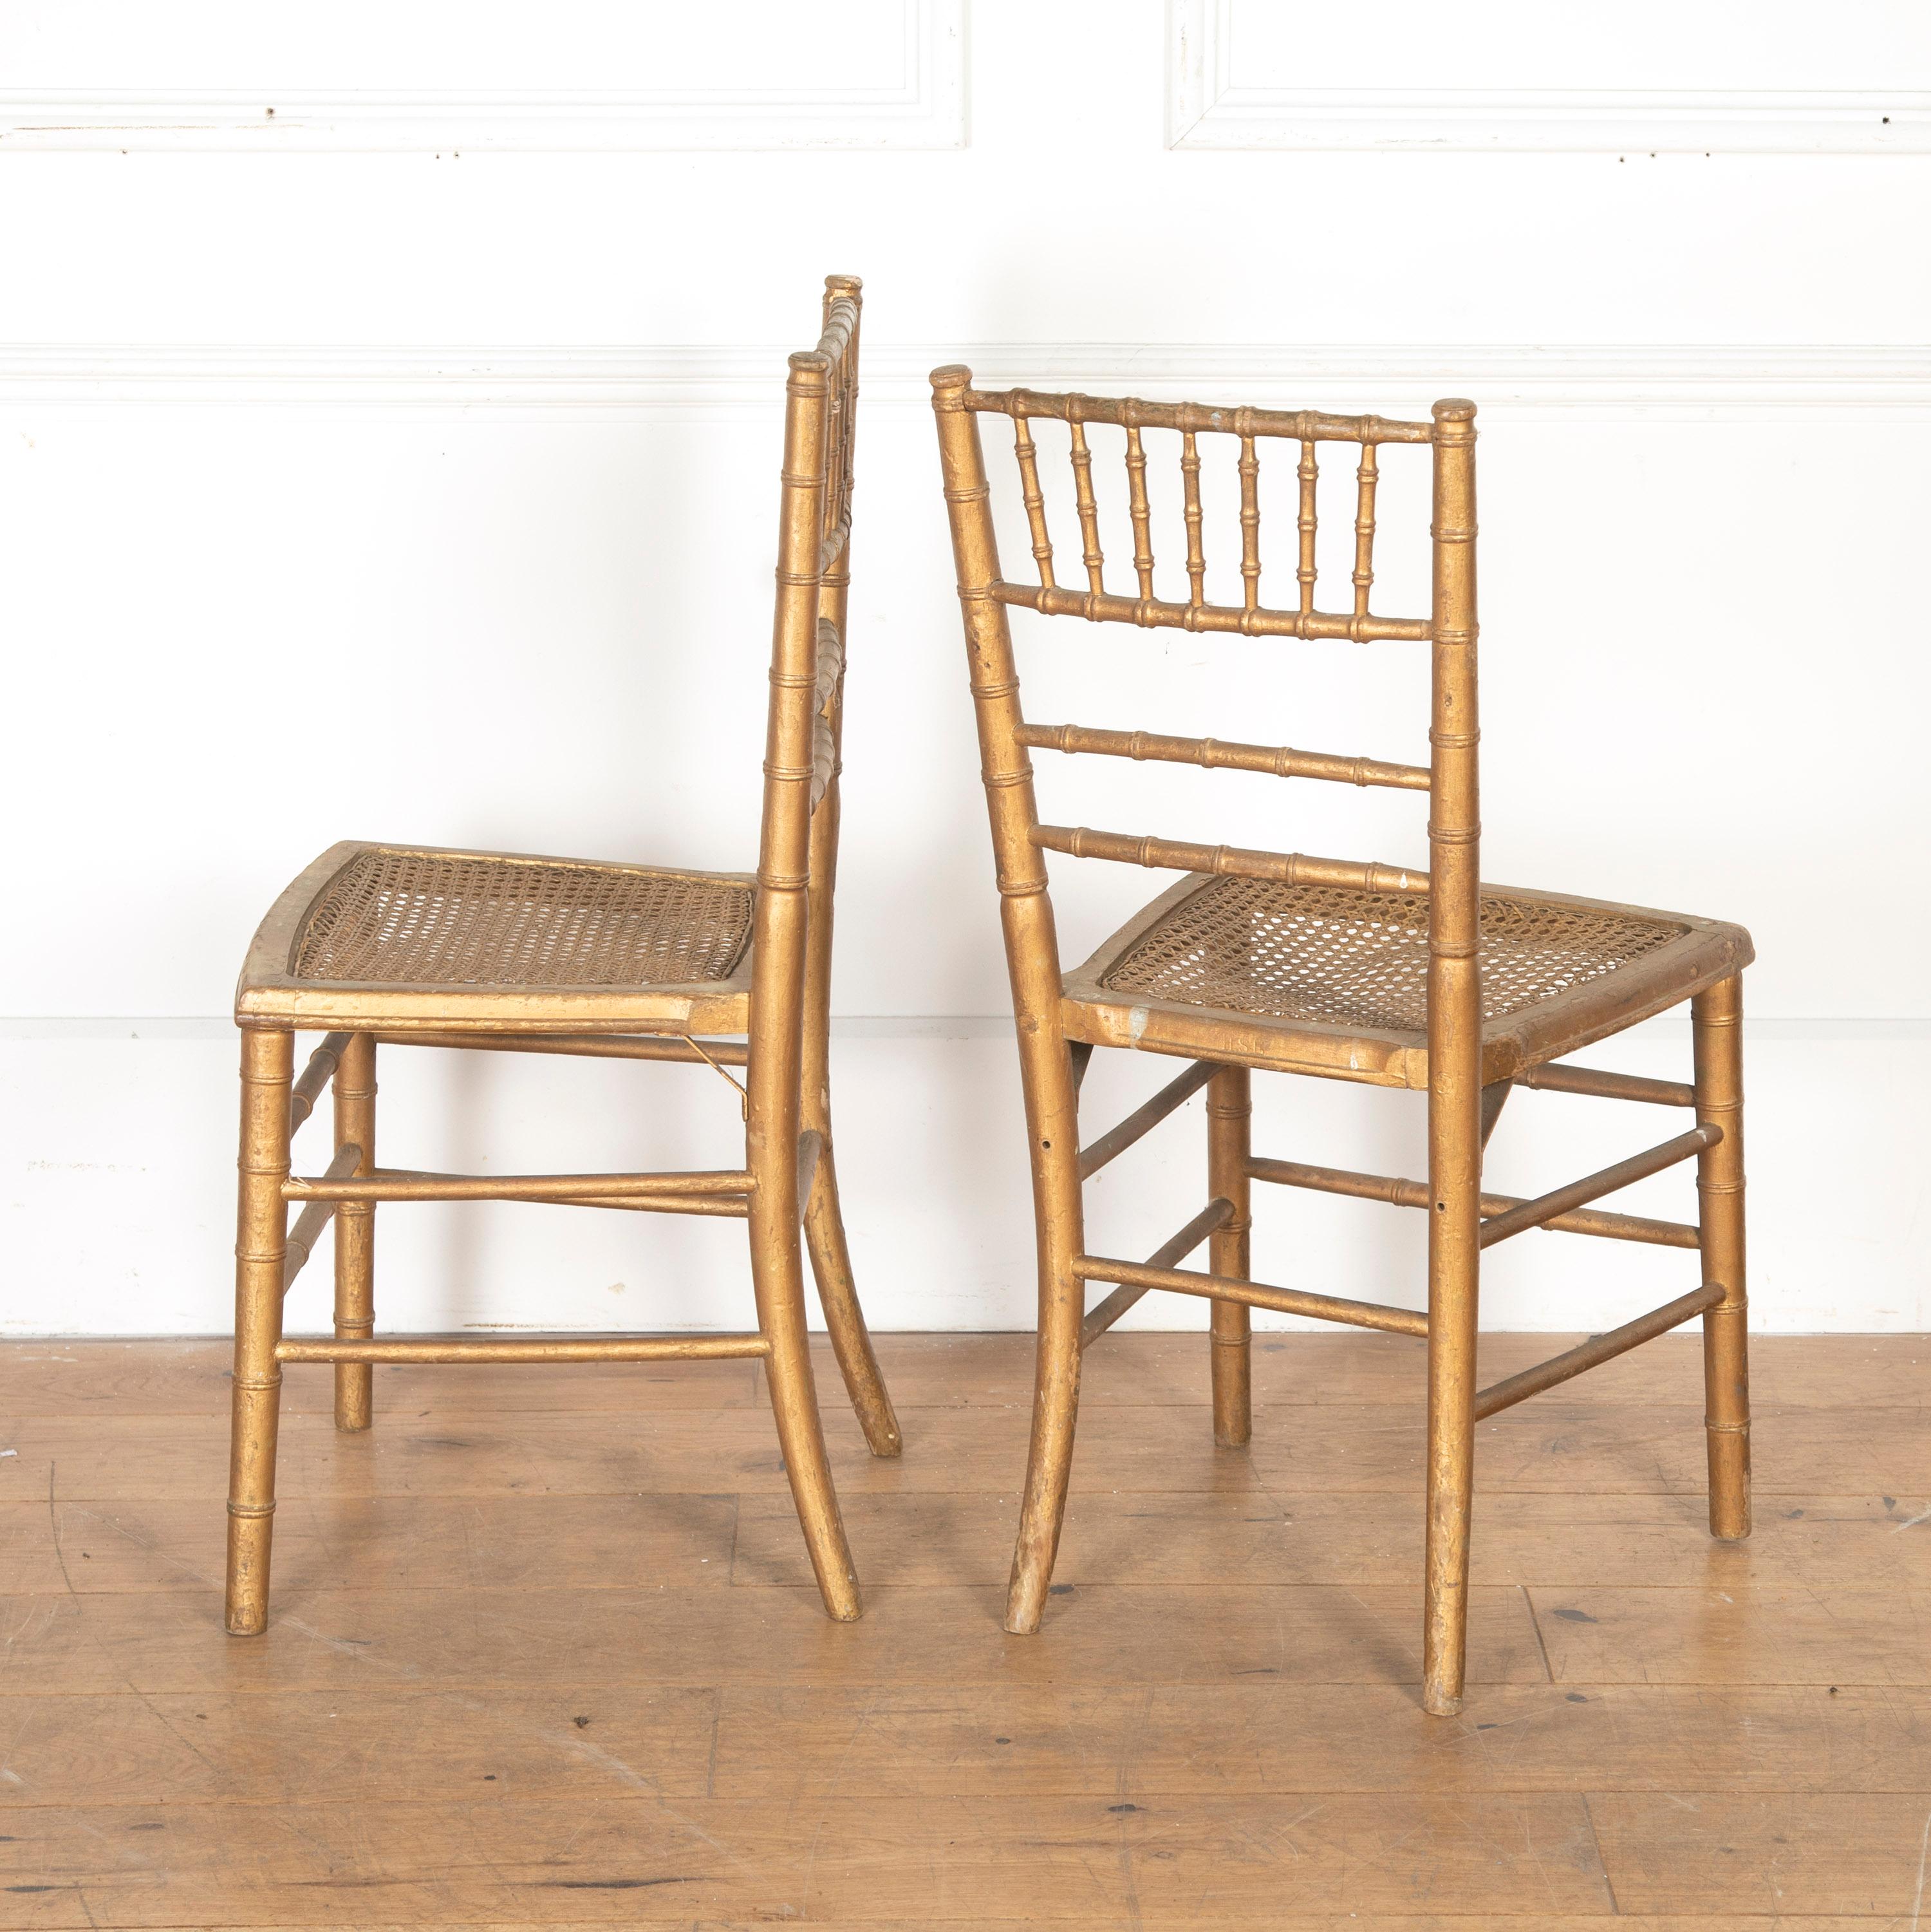 Fantastic set of twelve 19th Century carved and gilt beech ‘faux bamboo’ chairs, circa 1870.

Each chair is carved to imitate bamboo, identical examples can be seen within the National Trust Collection at Hughenden Manor.

All twelve chairs are